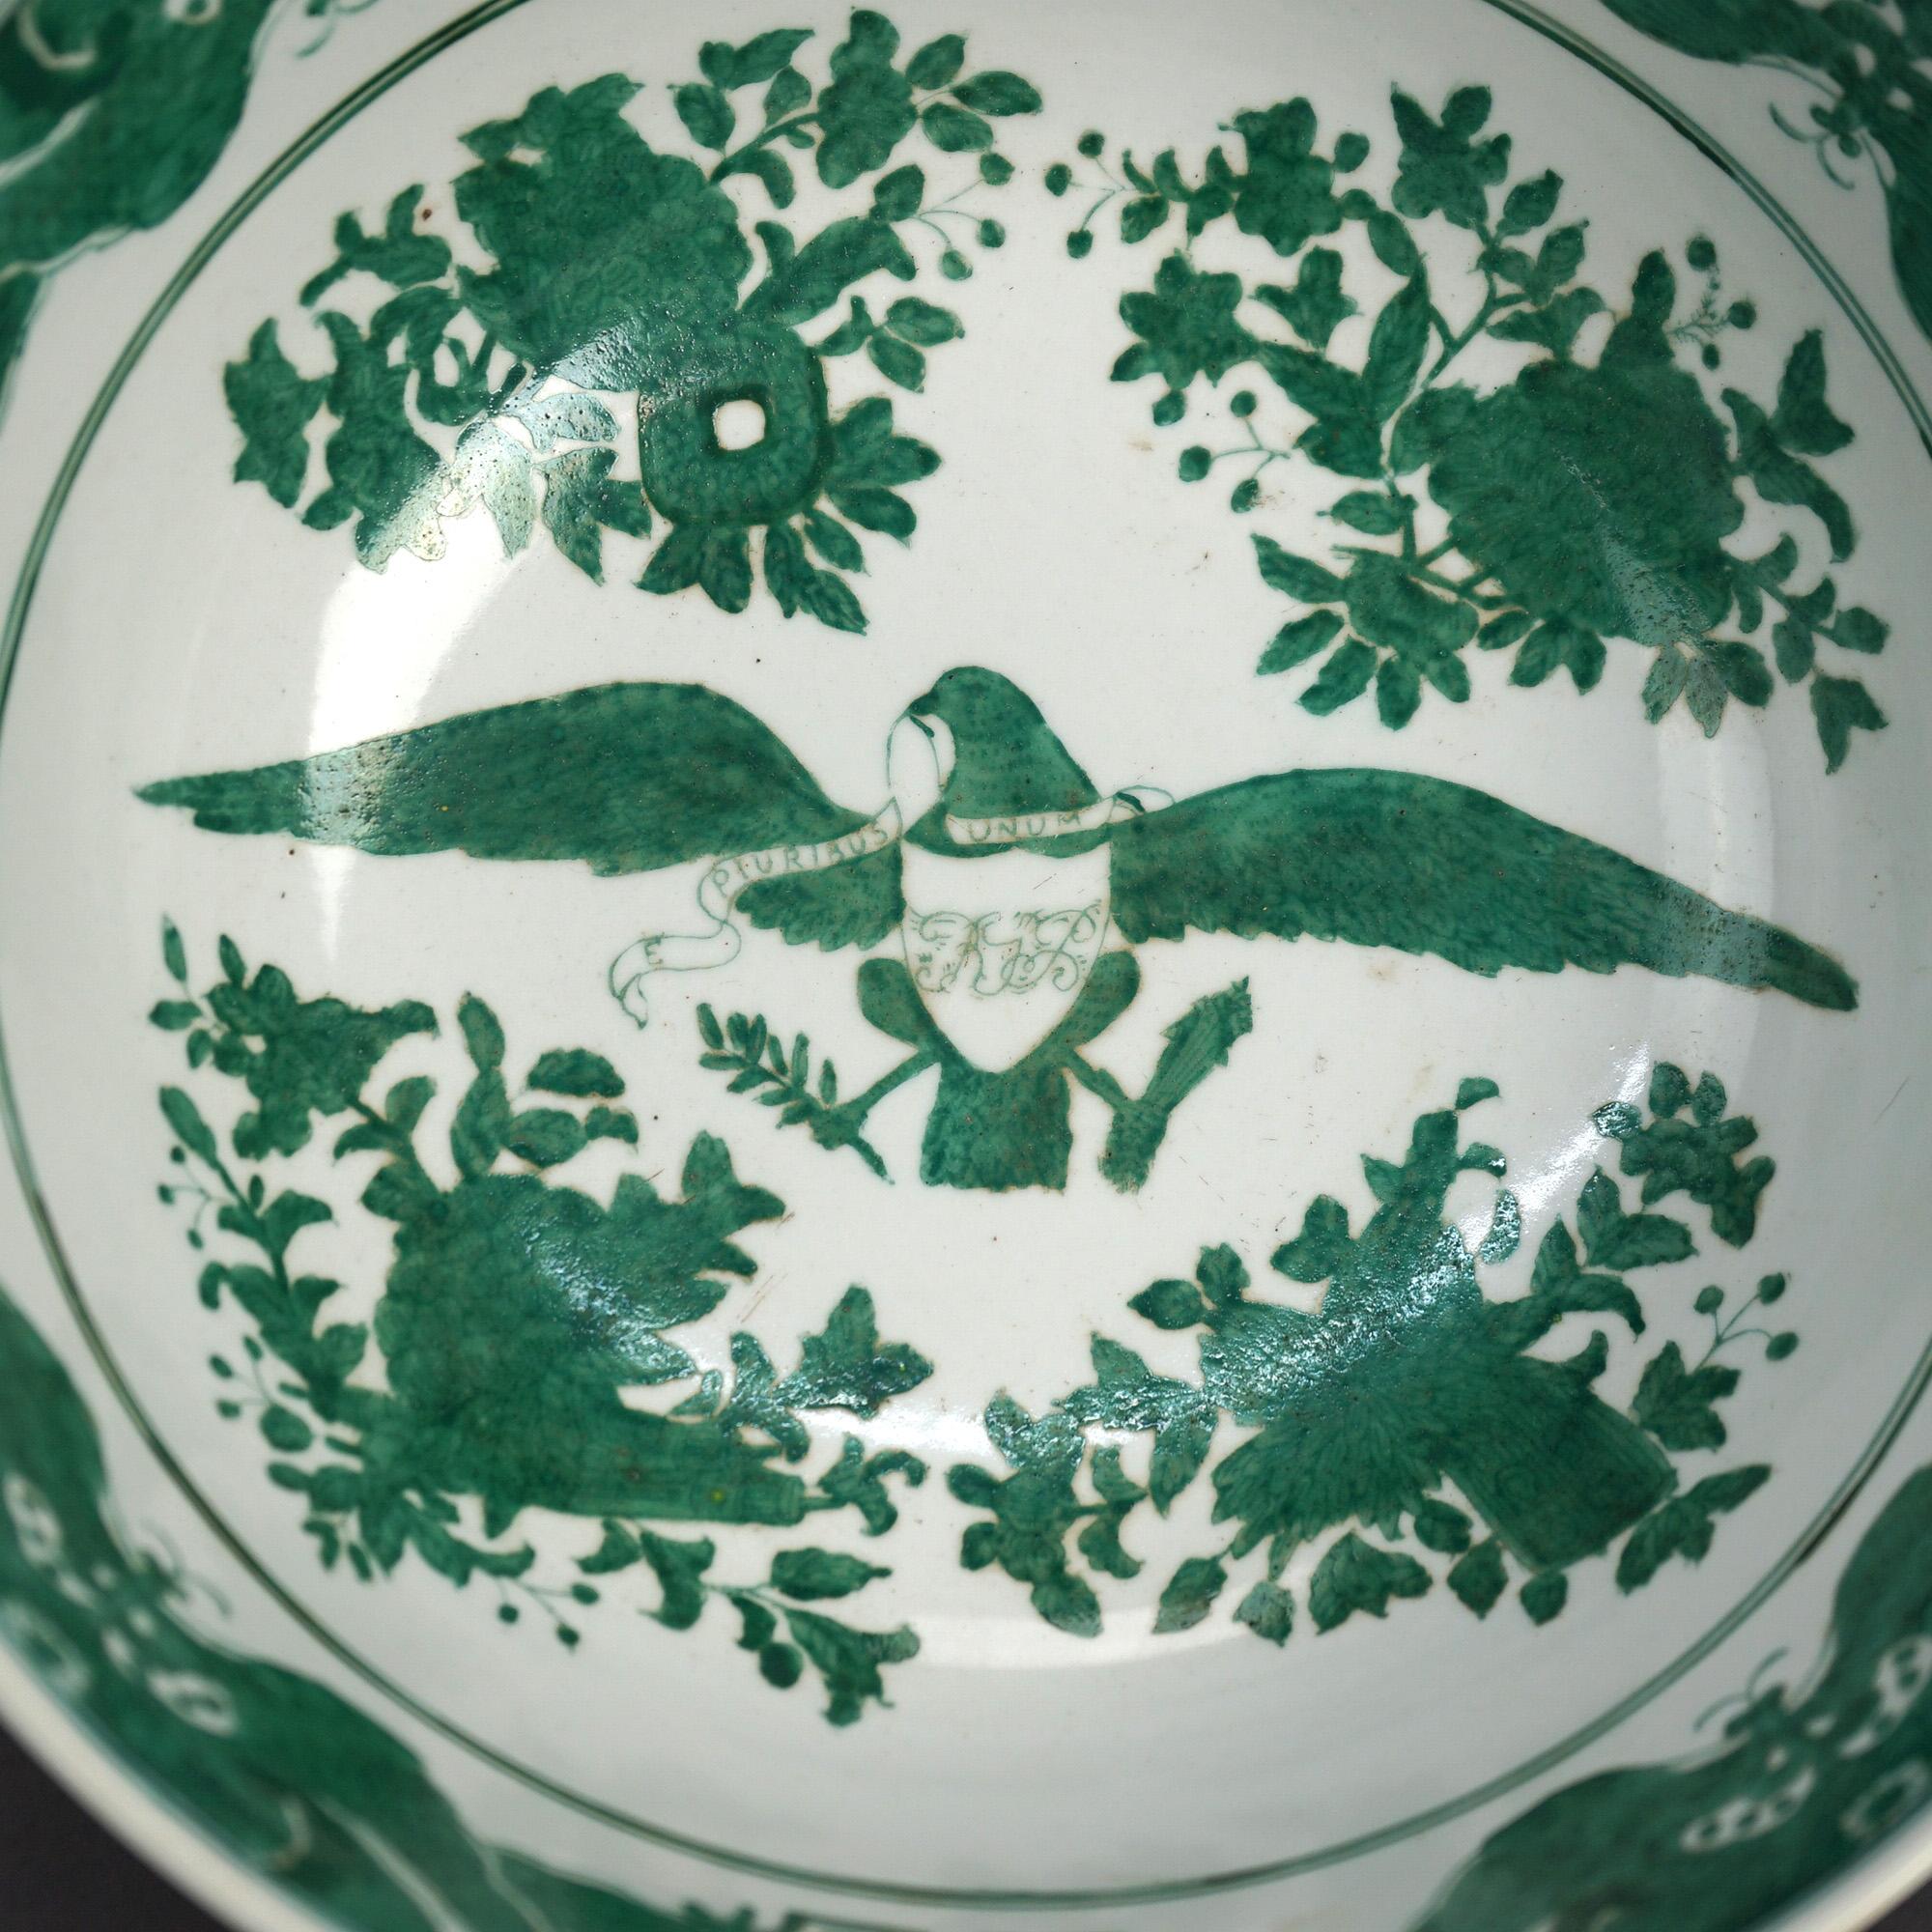 Chinese Export Porcelain Bowl With Eagle Design 20thC

Measures- 4.75''H x 10.25''W x 10.25''D